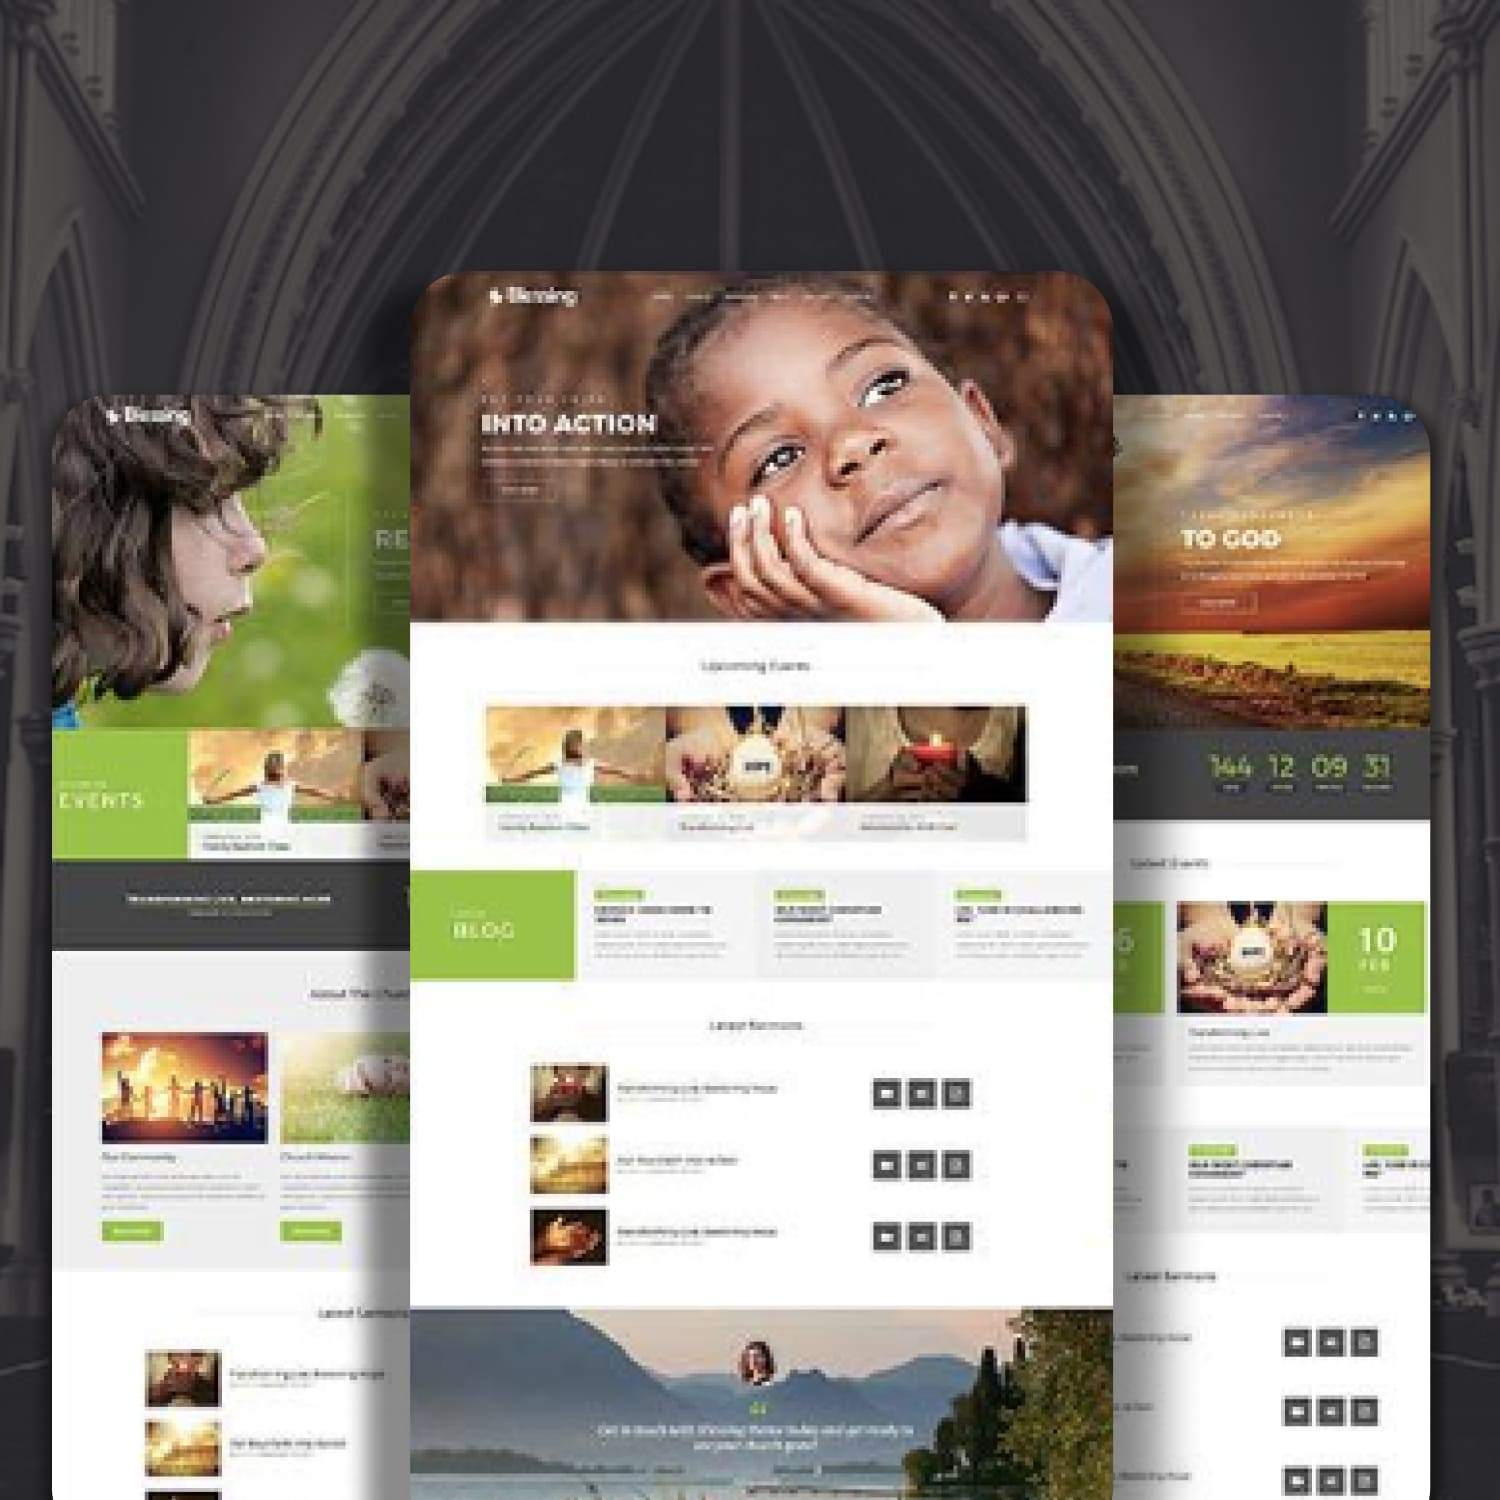 3 different homepages of Heaven's Corner Church Theme.